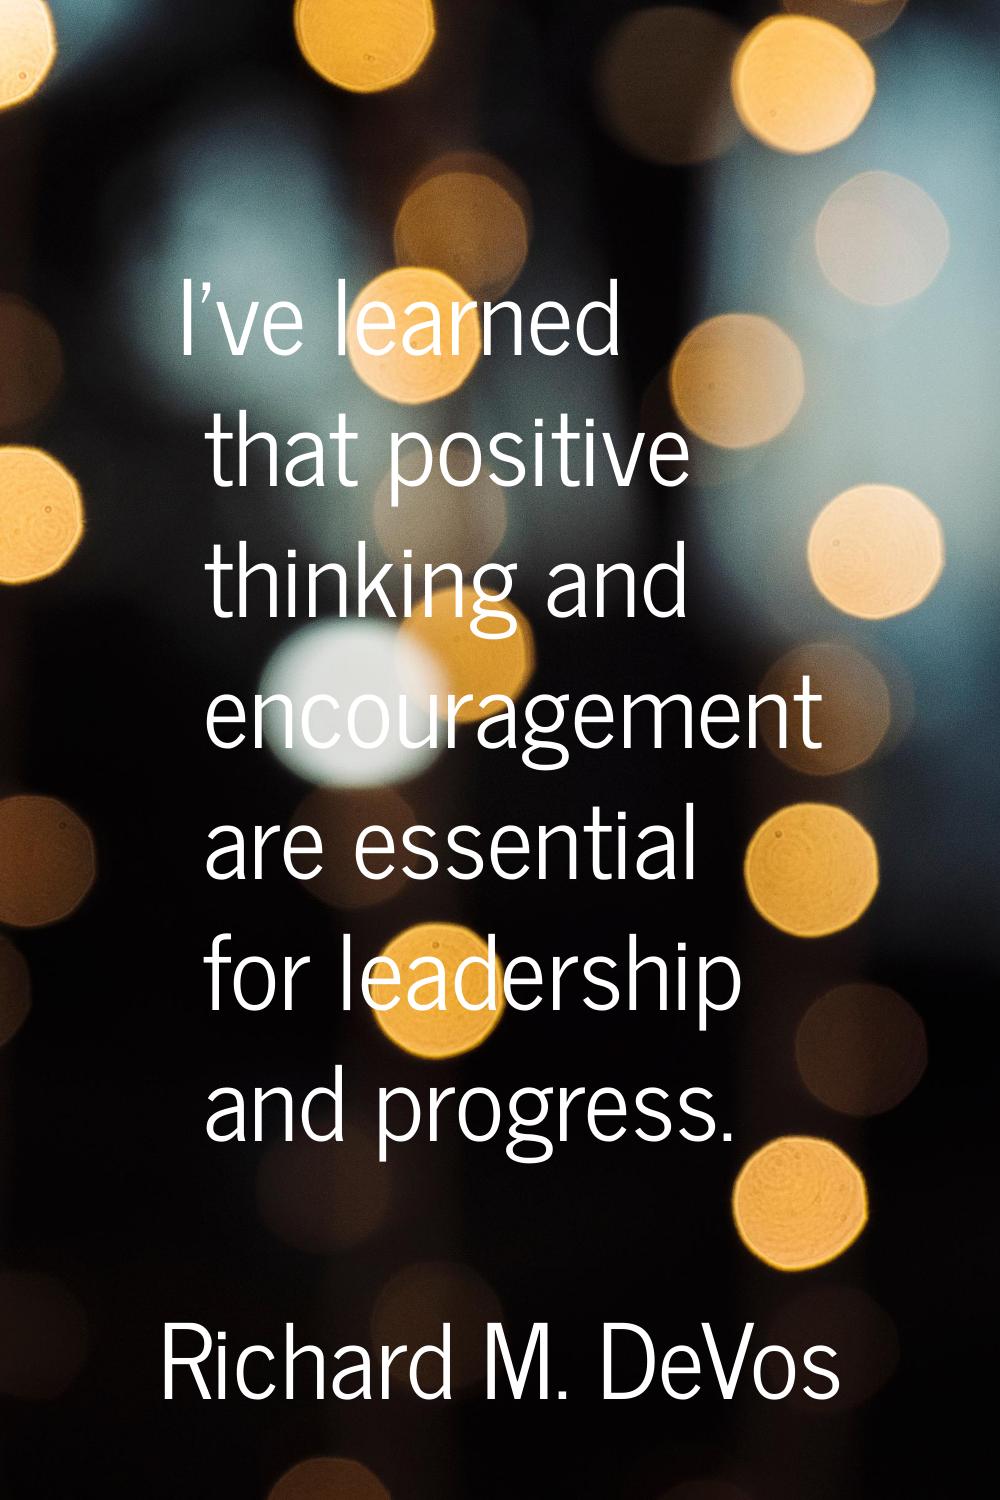 I've learned that positive thinking and encouragement are essential for leadership and progress.